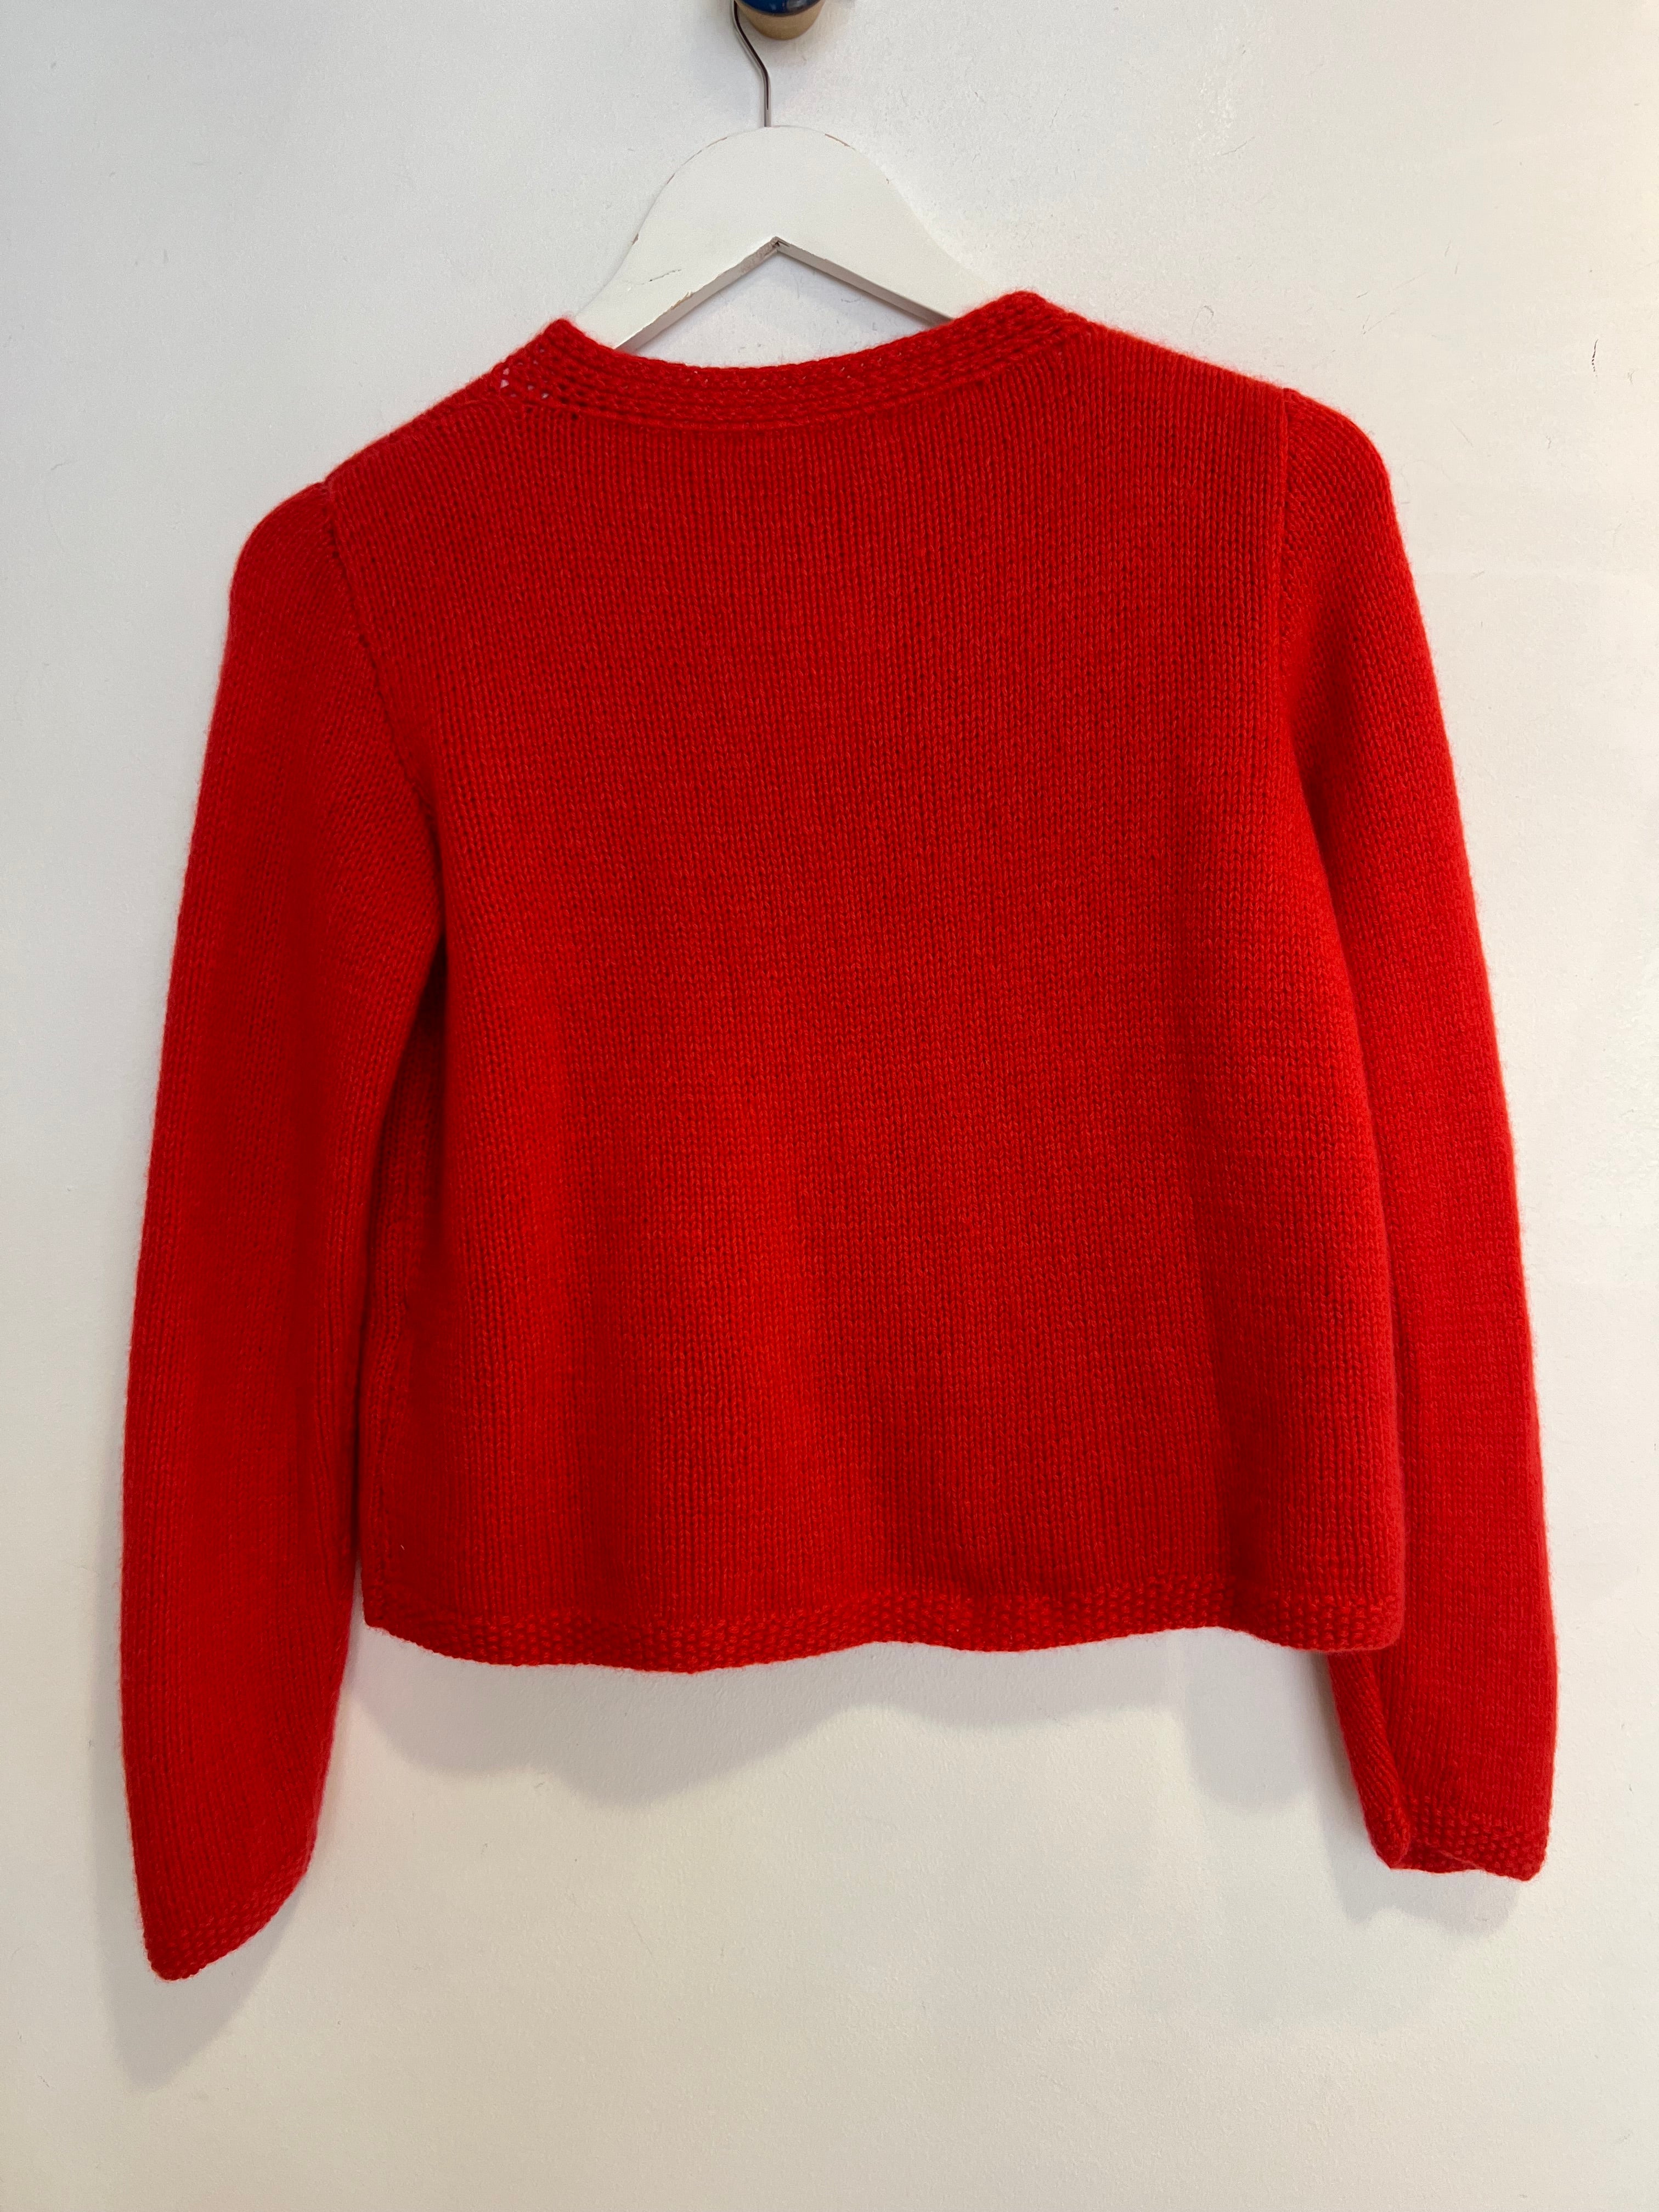 Hetre Alresford Hampshire Clothes Store English Weather Orkney Red Cardigan